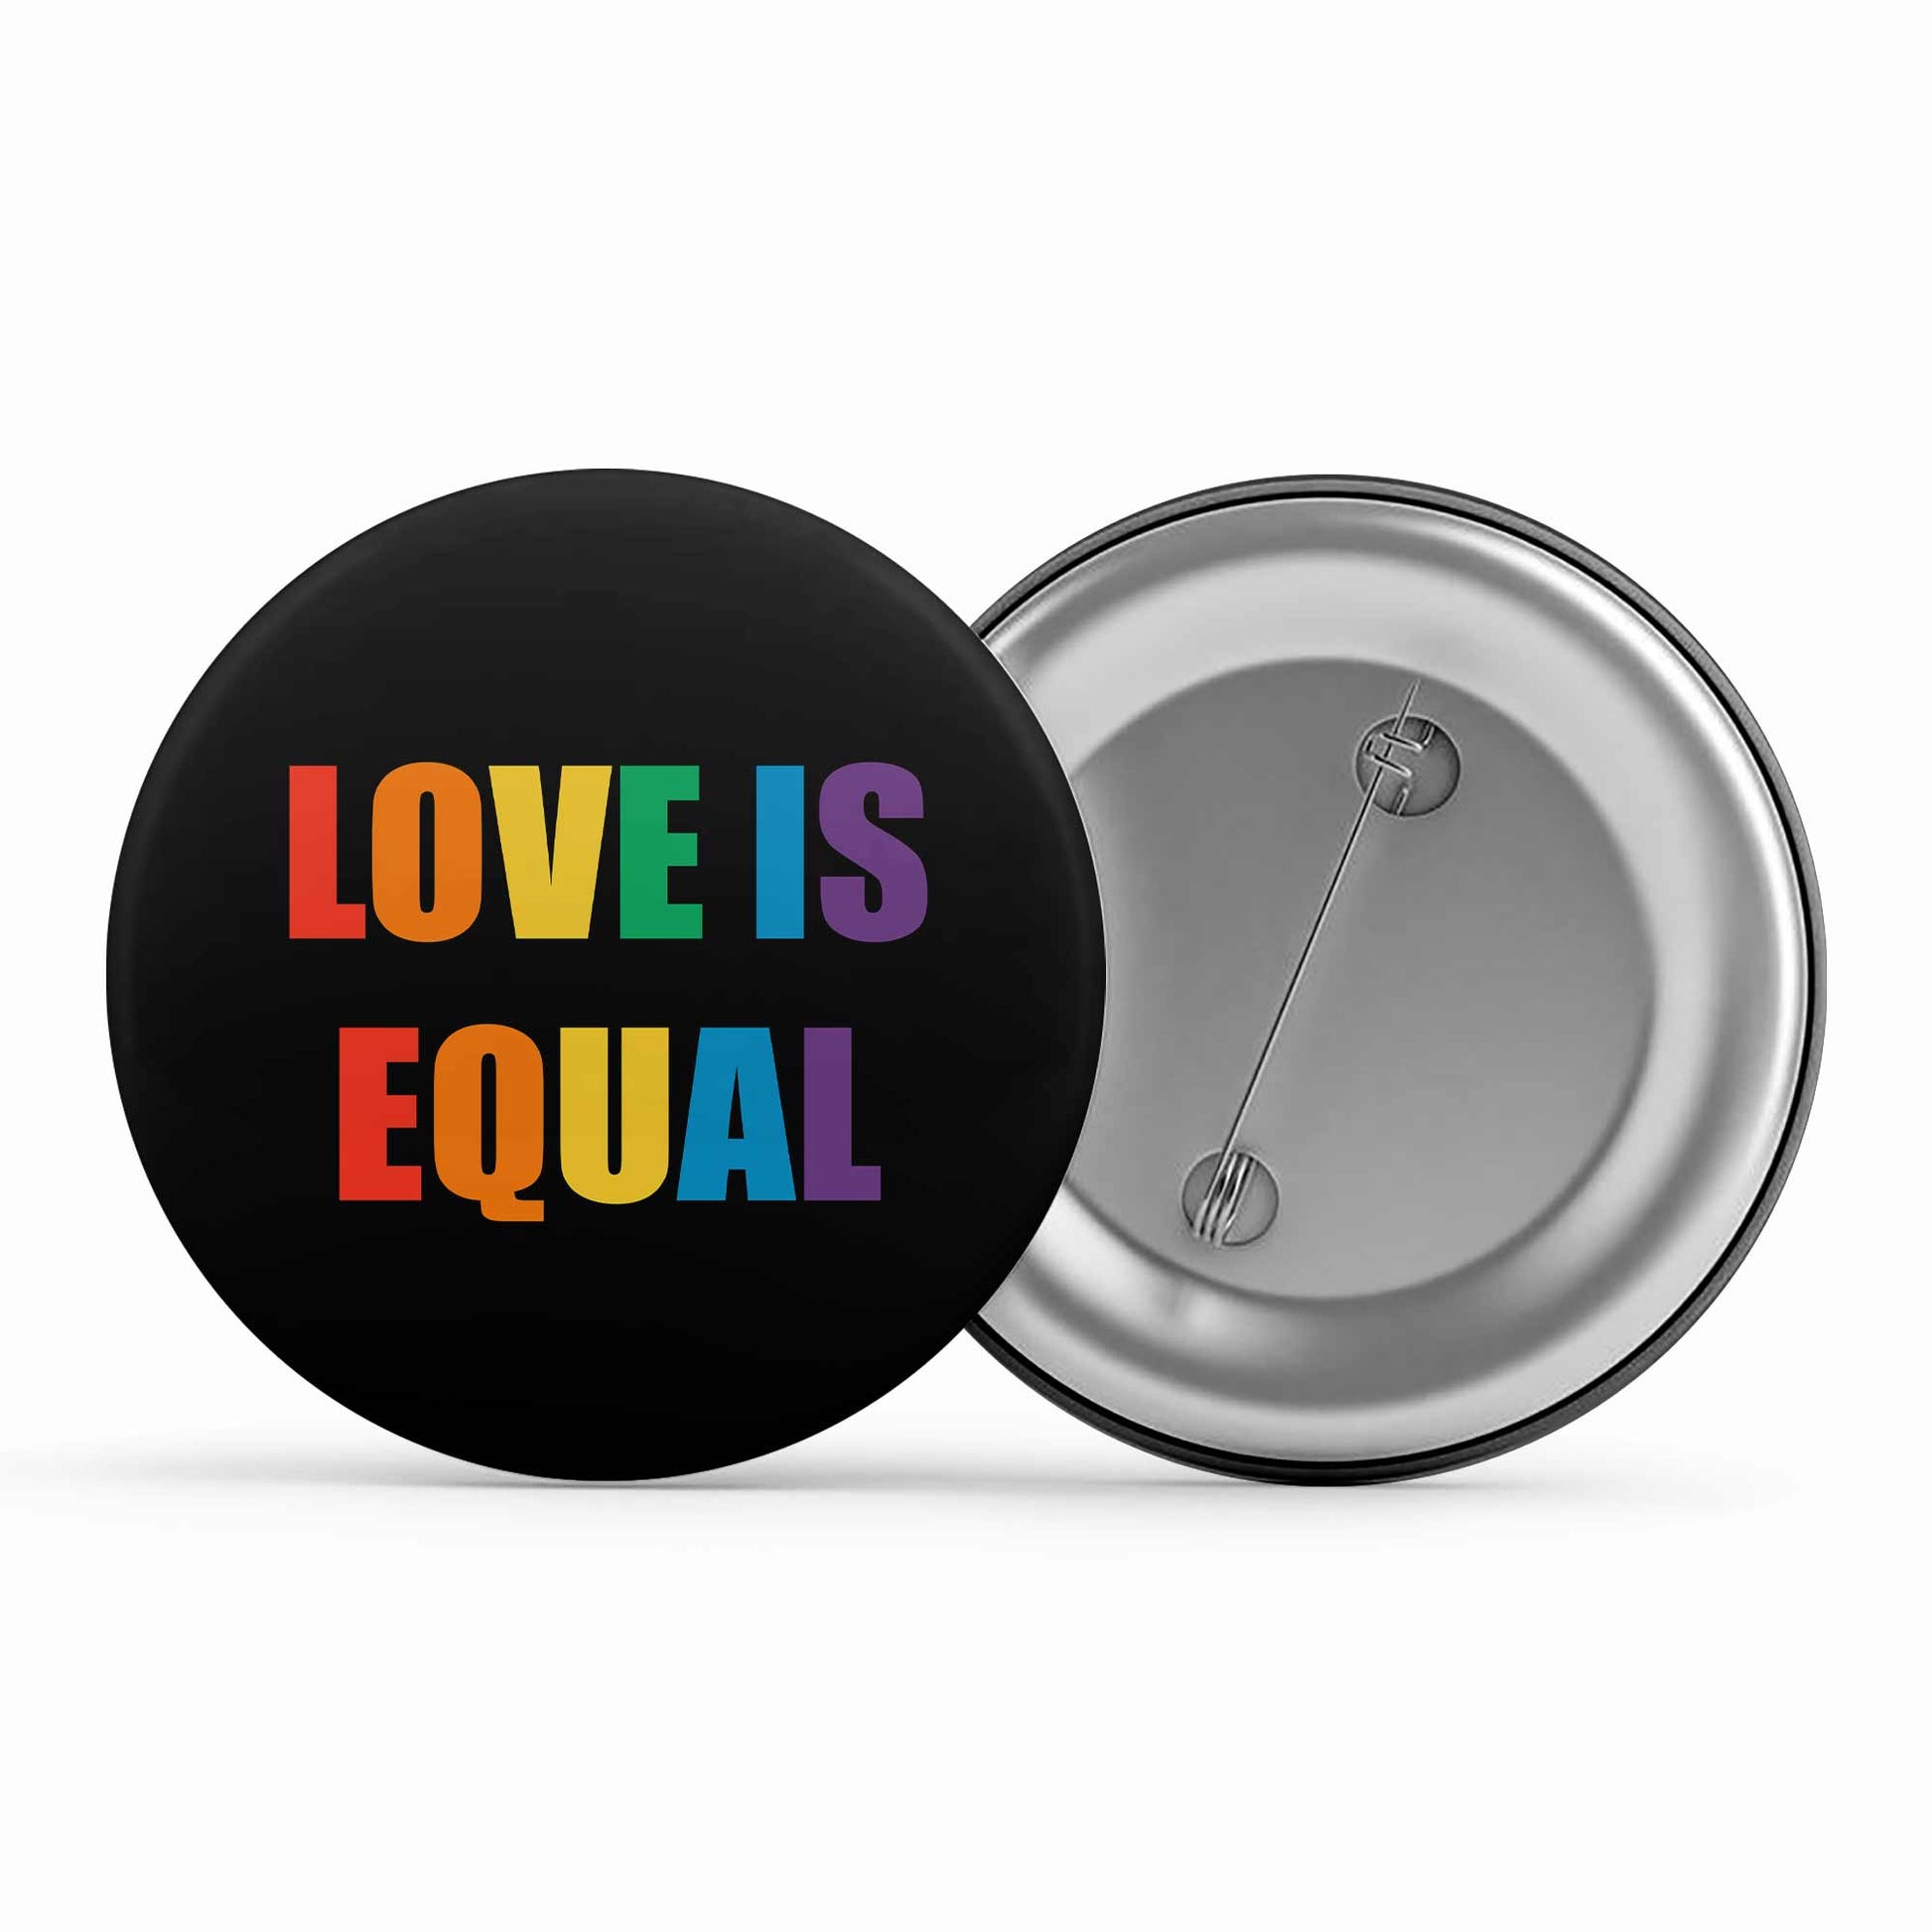 pride love is equal badge pin button printed graphic stylish buy online india the banyan tee tbt men women girls boys unisex  - lgbtqia+